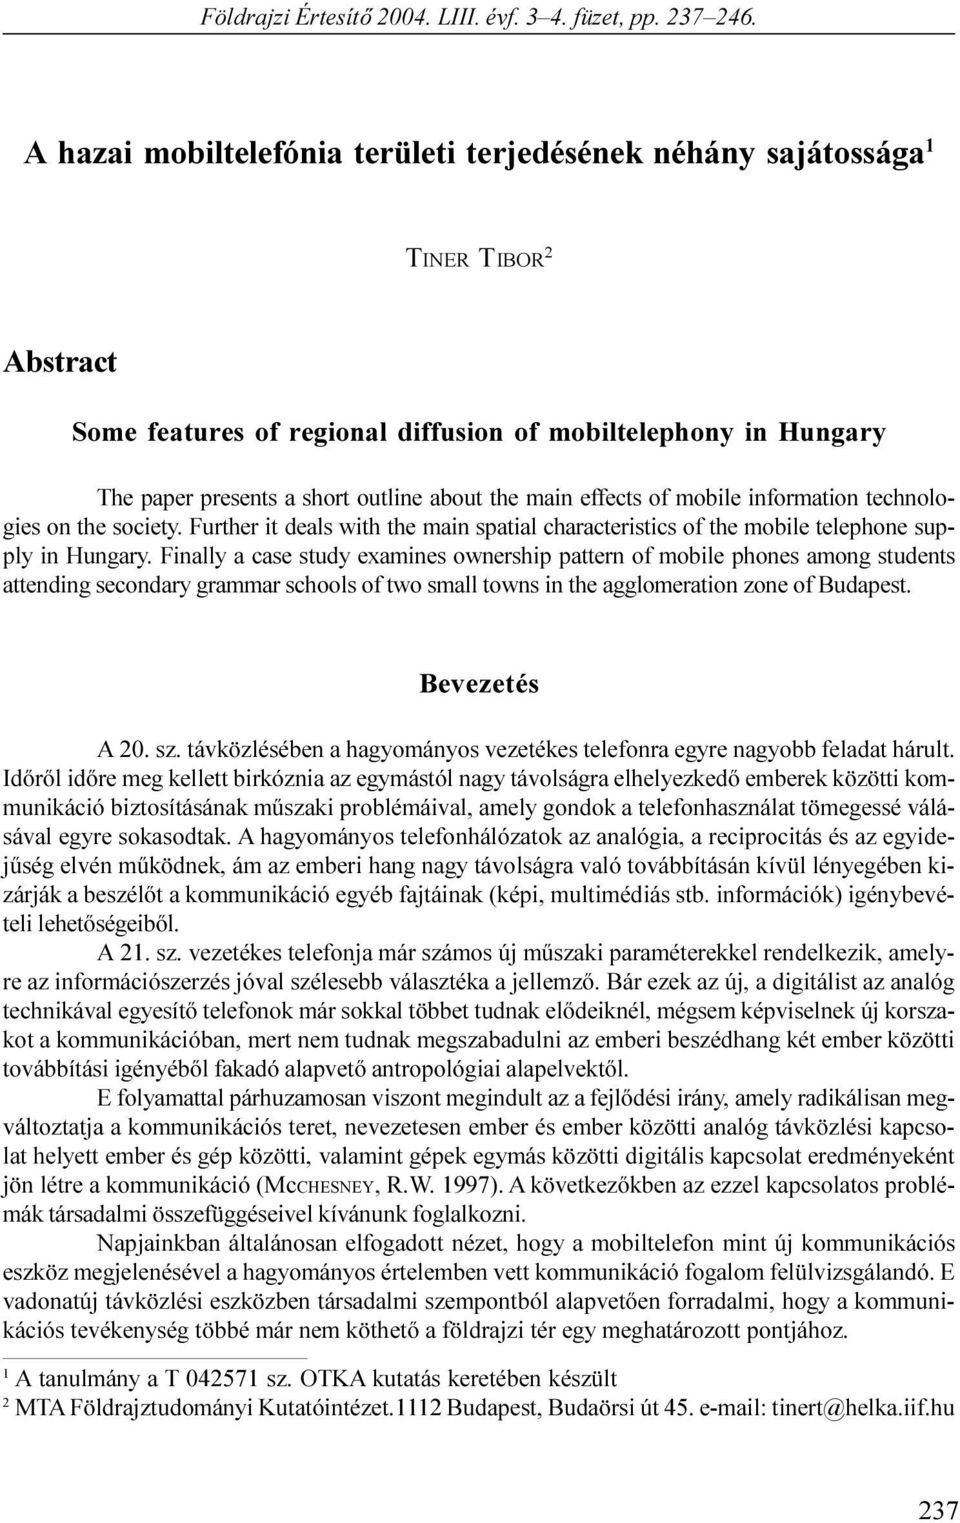 main effects of mobile information technologies on the society. Further it deals with the main spatial characteristics of the mobile telephone supply in Hungary.